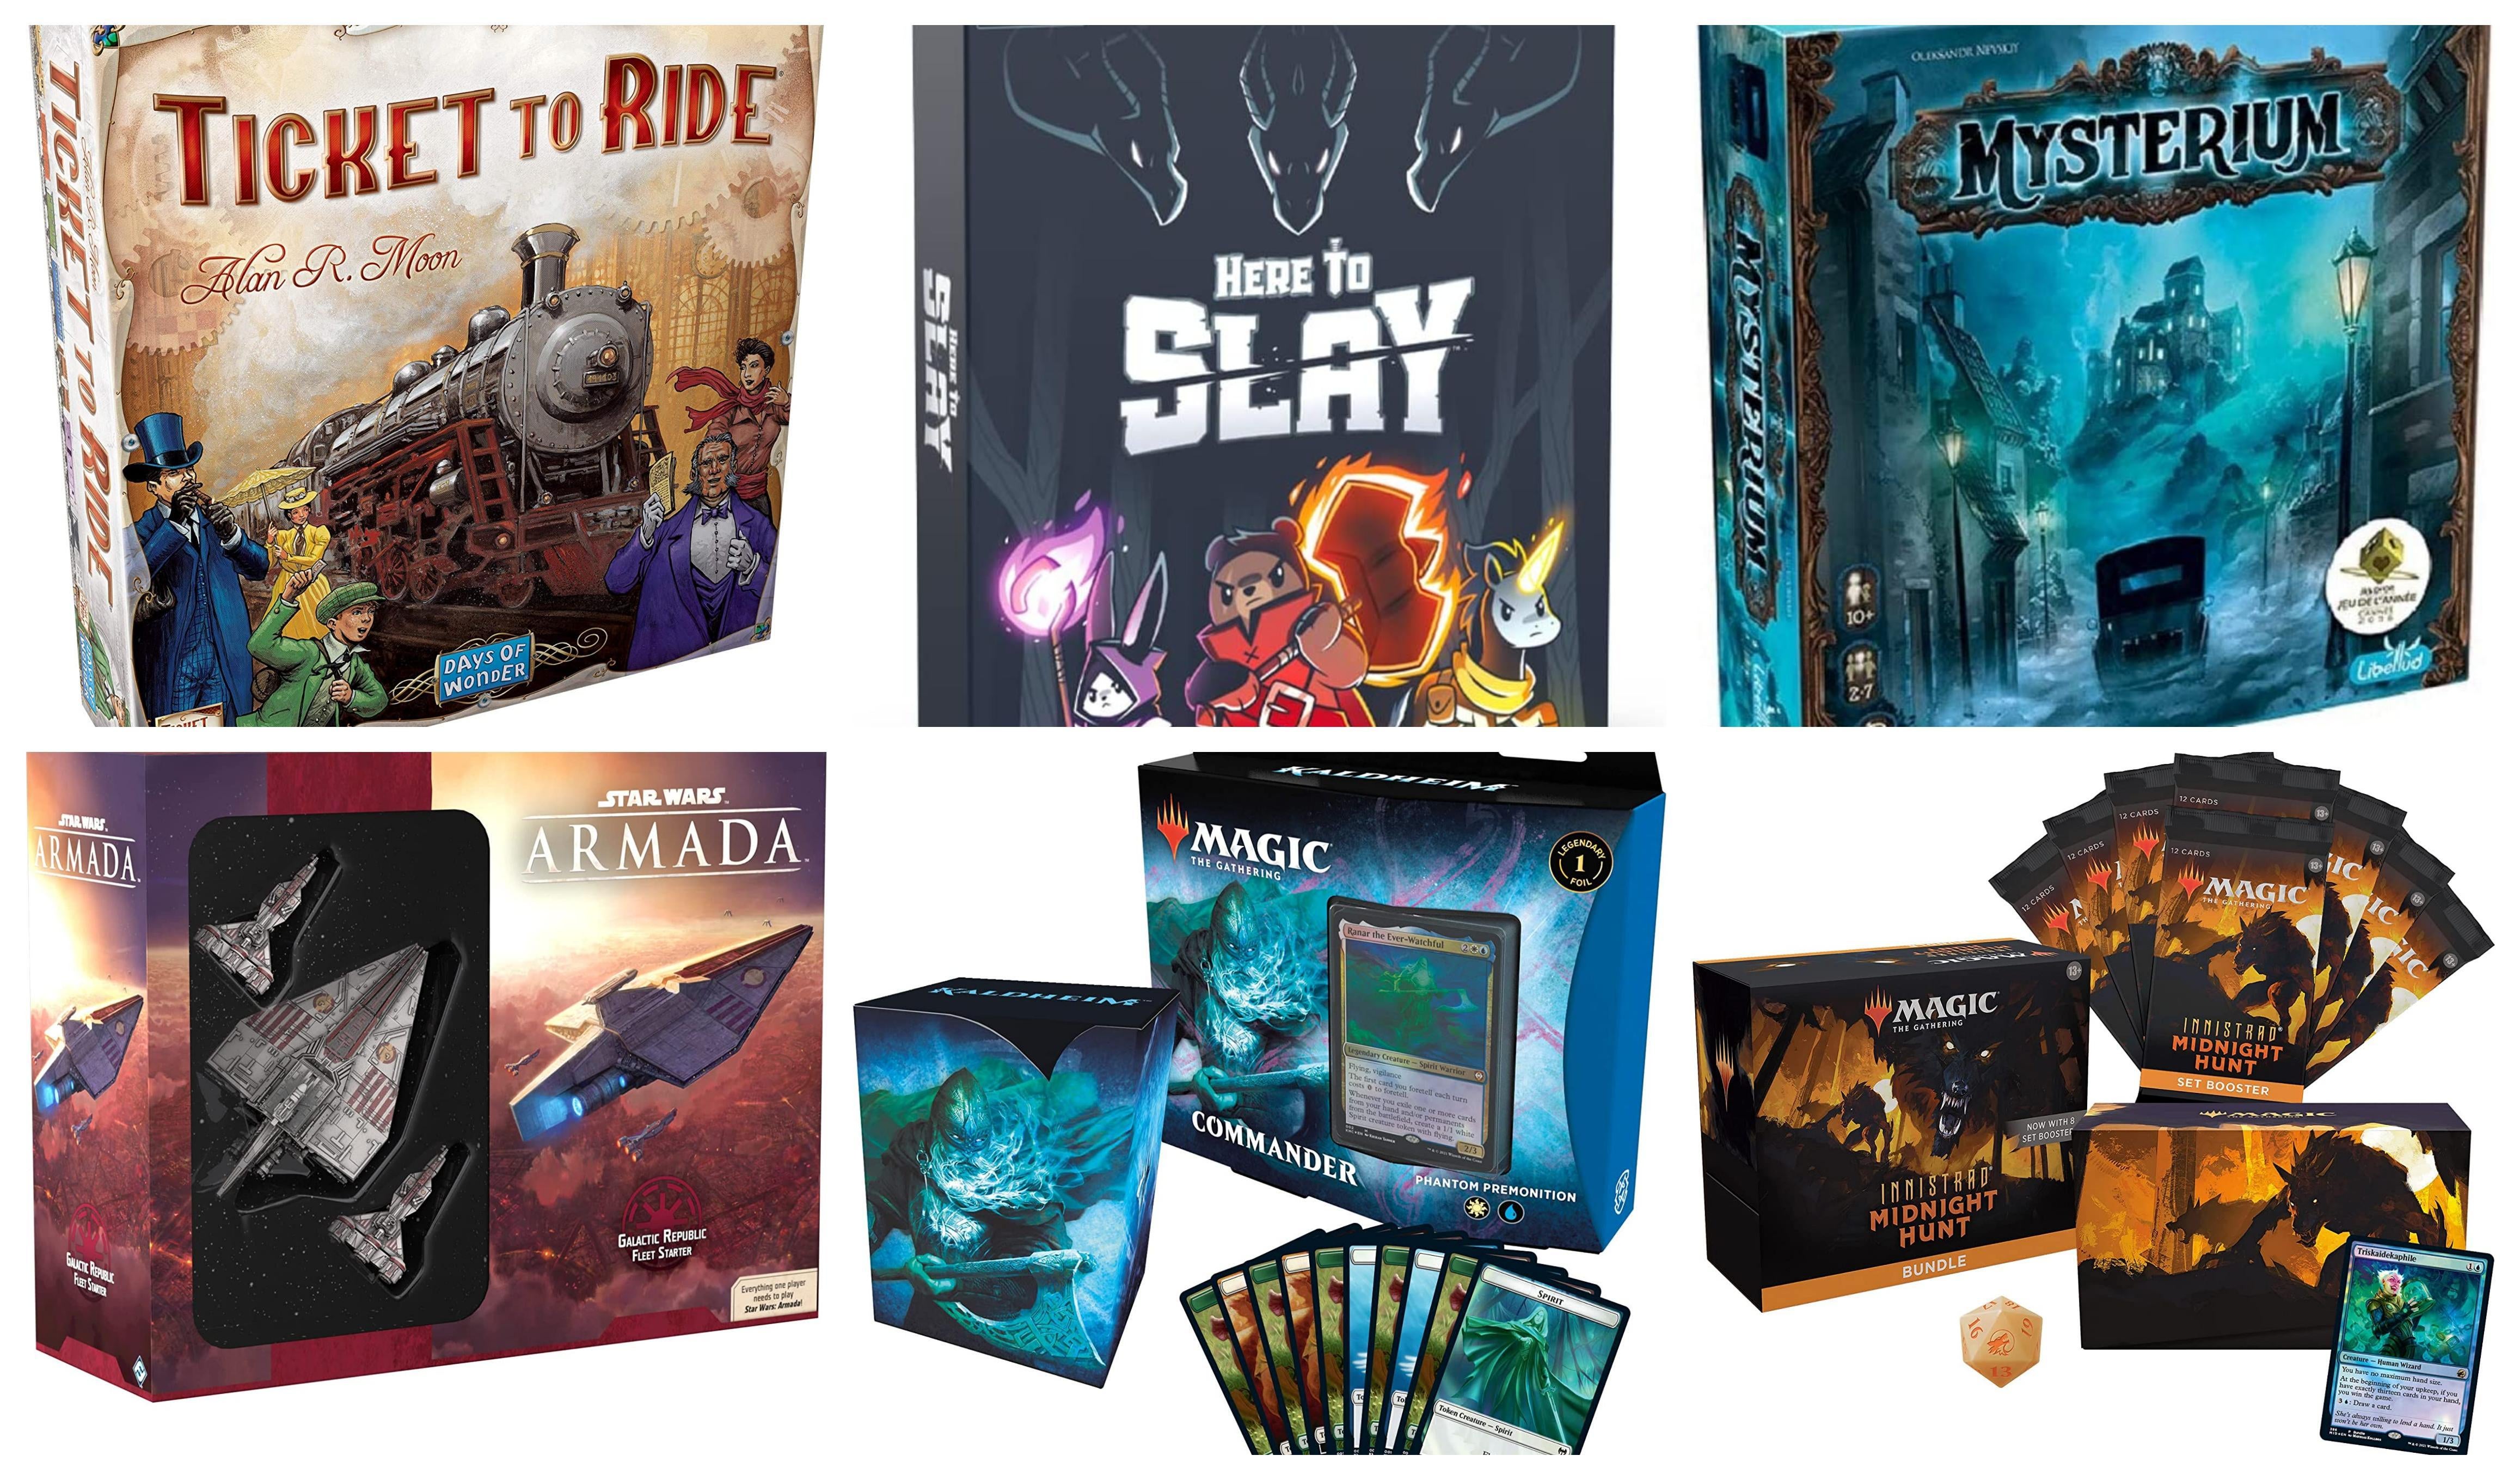 Amazon Prime Day Delivers Deals on Magic the Gathering and Board Games